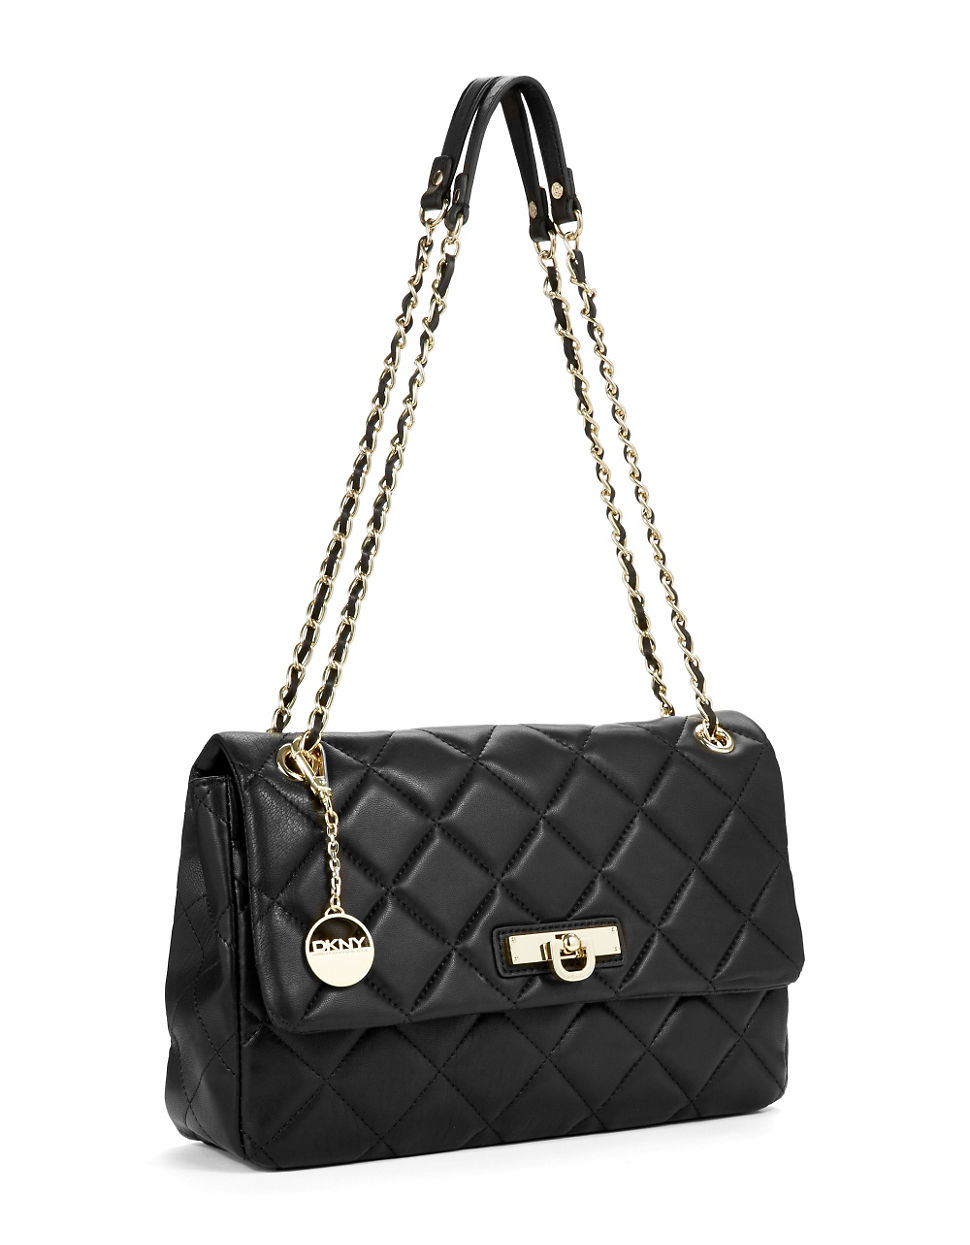 Dkny Quilted Nappa Purse in Black | Lyst